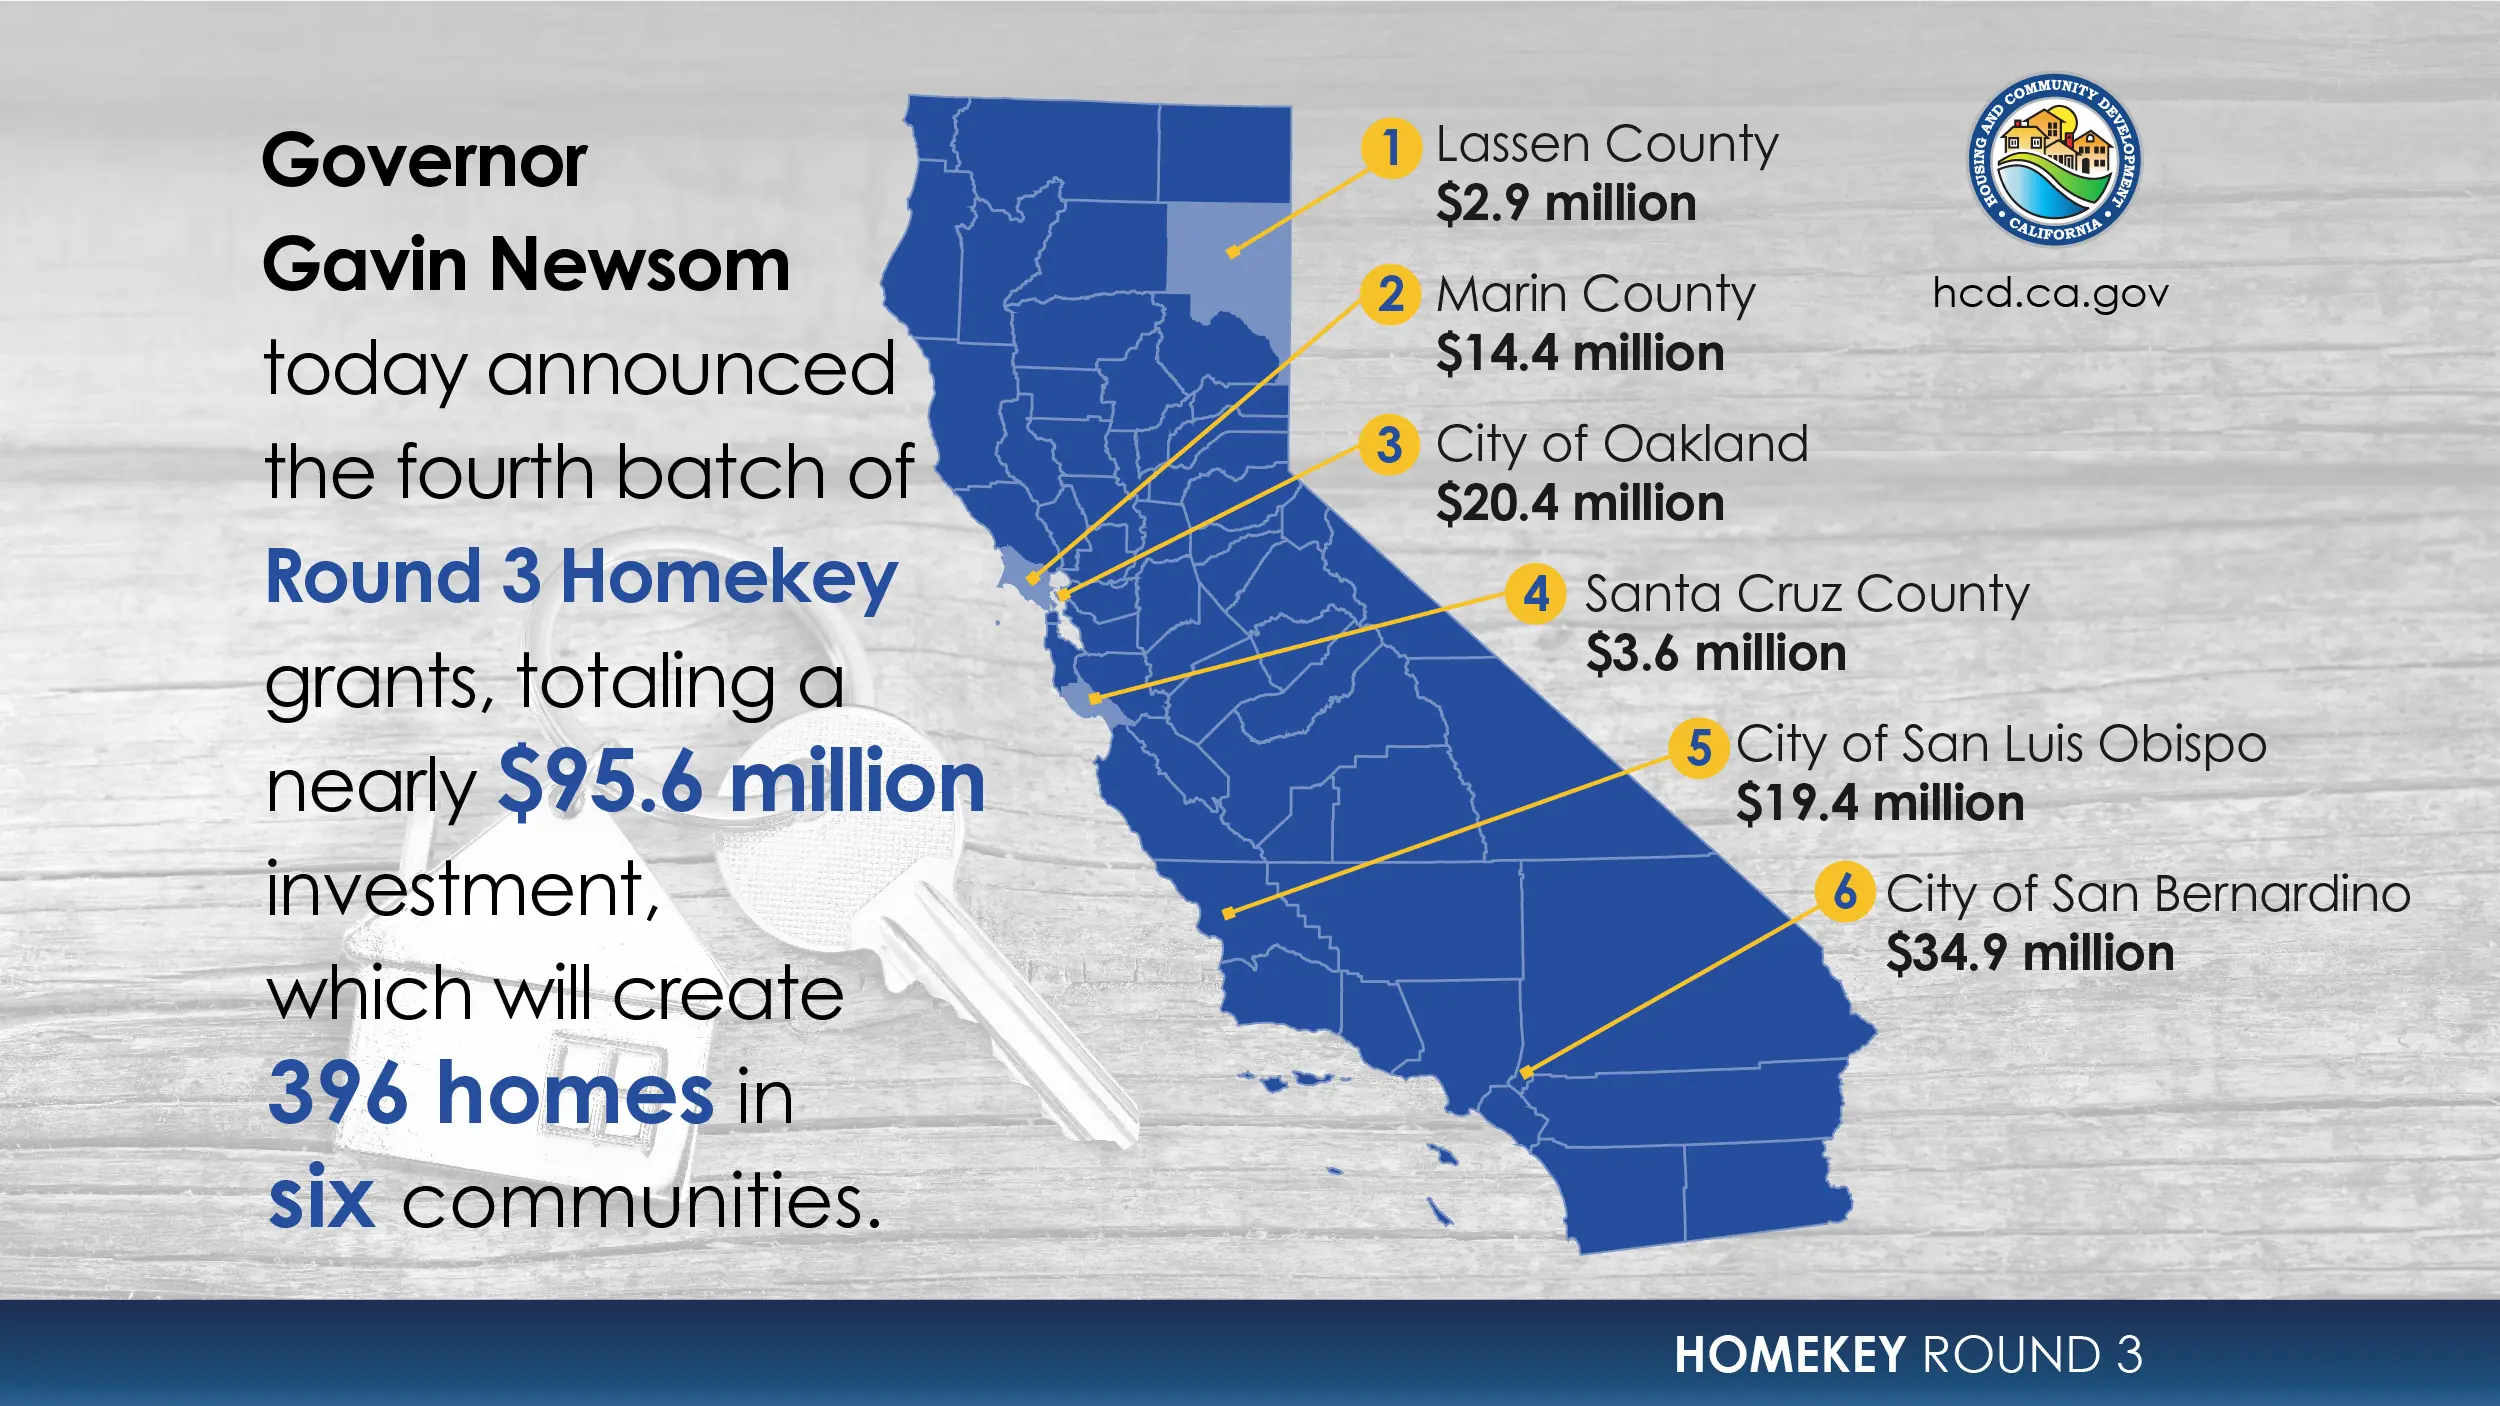 Map of California with awarded cities highlighted. Text reads: Governor Gavin Newsom today announced the fourth batch of round 3  Homekey grants, totaling a nearly $95.6 million investment, which will create 396 homes in six communities. Lassen County, $2.9 million; Marin County $14.4 million; City of Oakland, $20.4 million; Santa Cruz County, $3.6 million; City of San Luis Obispo, $19.4 million; City of San Bernardino, $34.9 million.